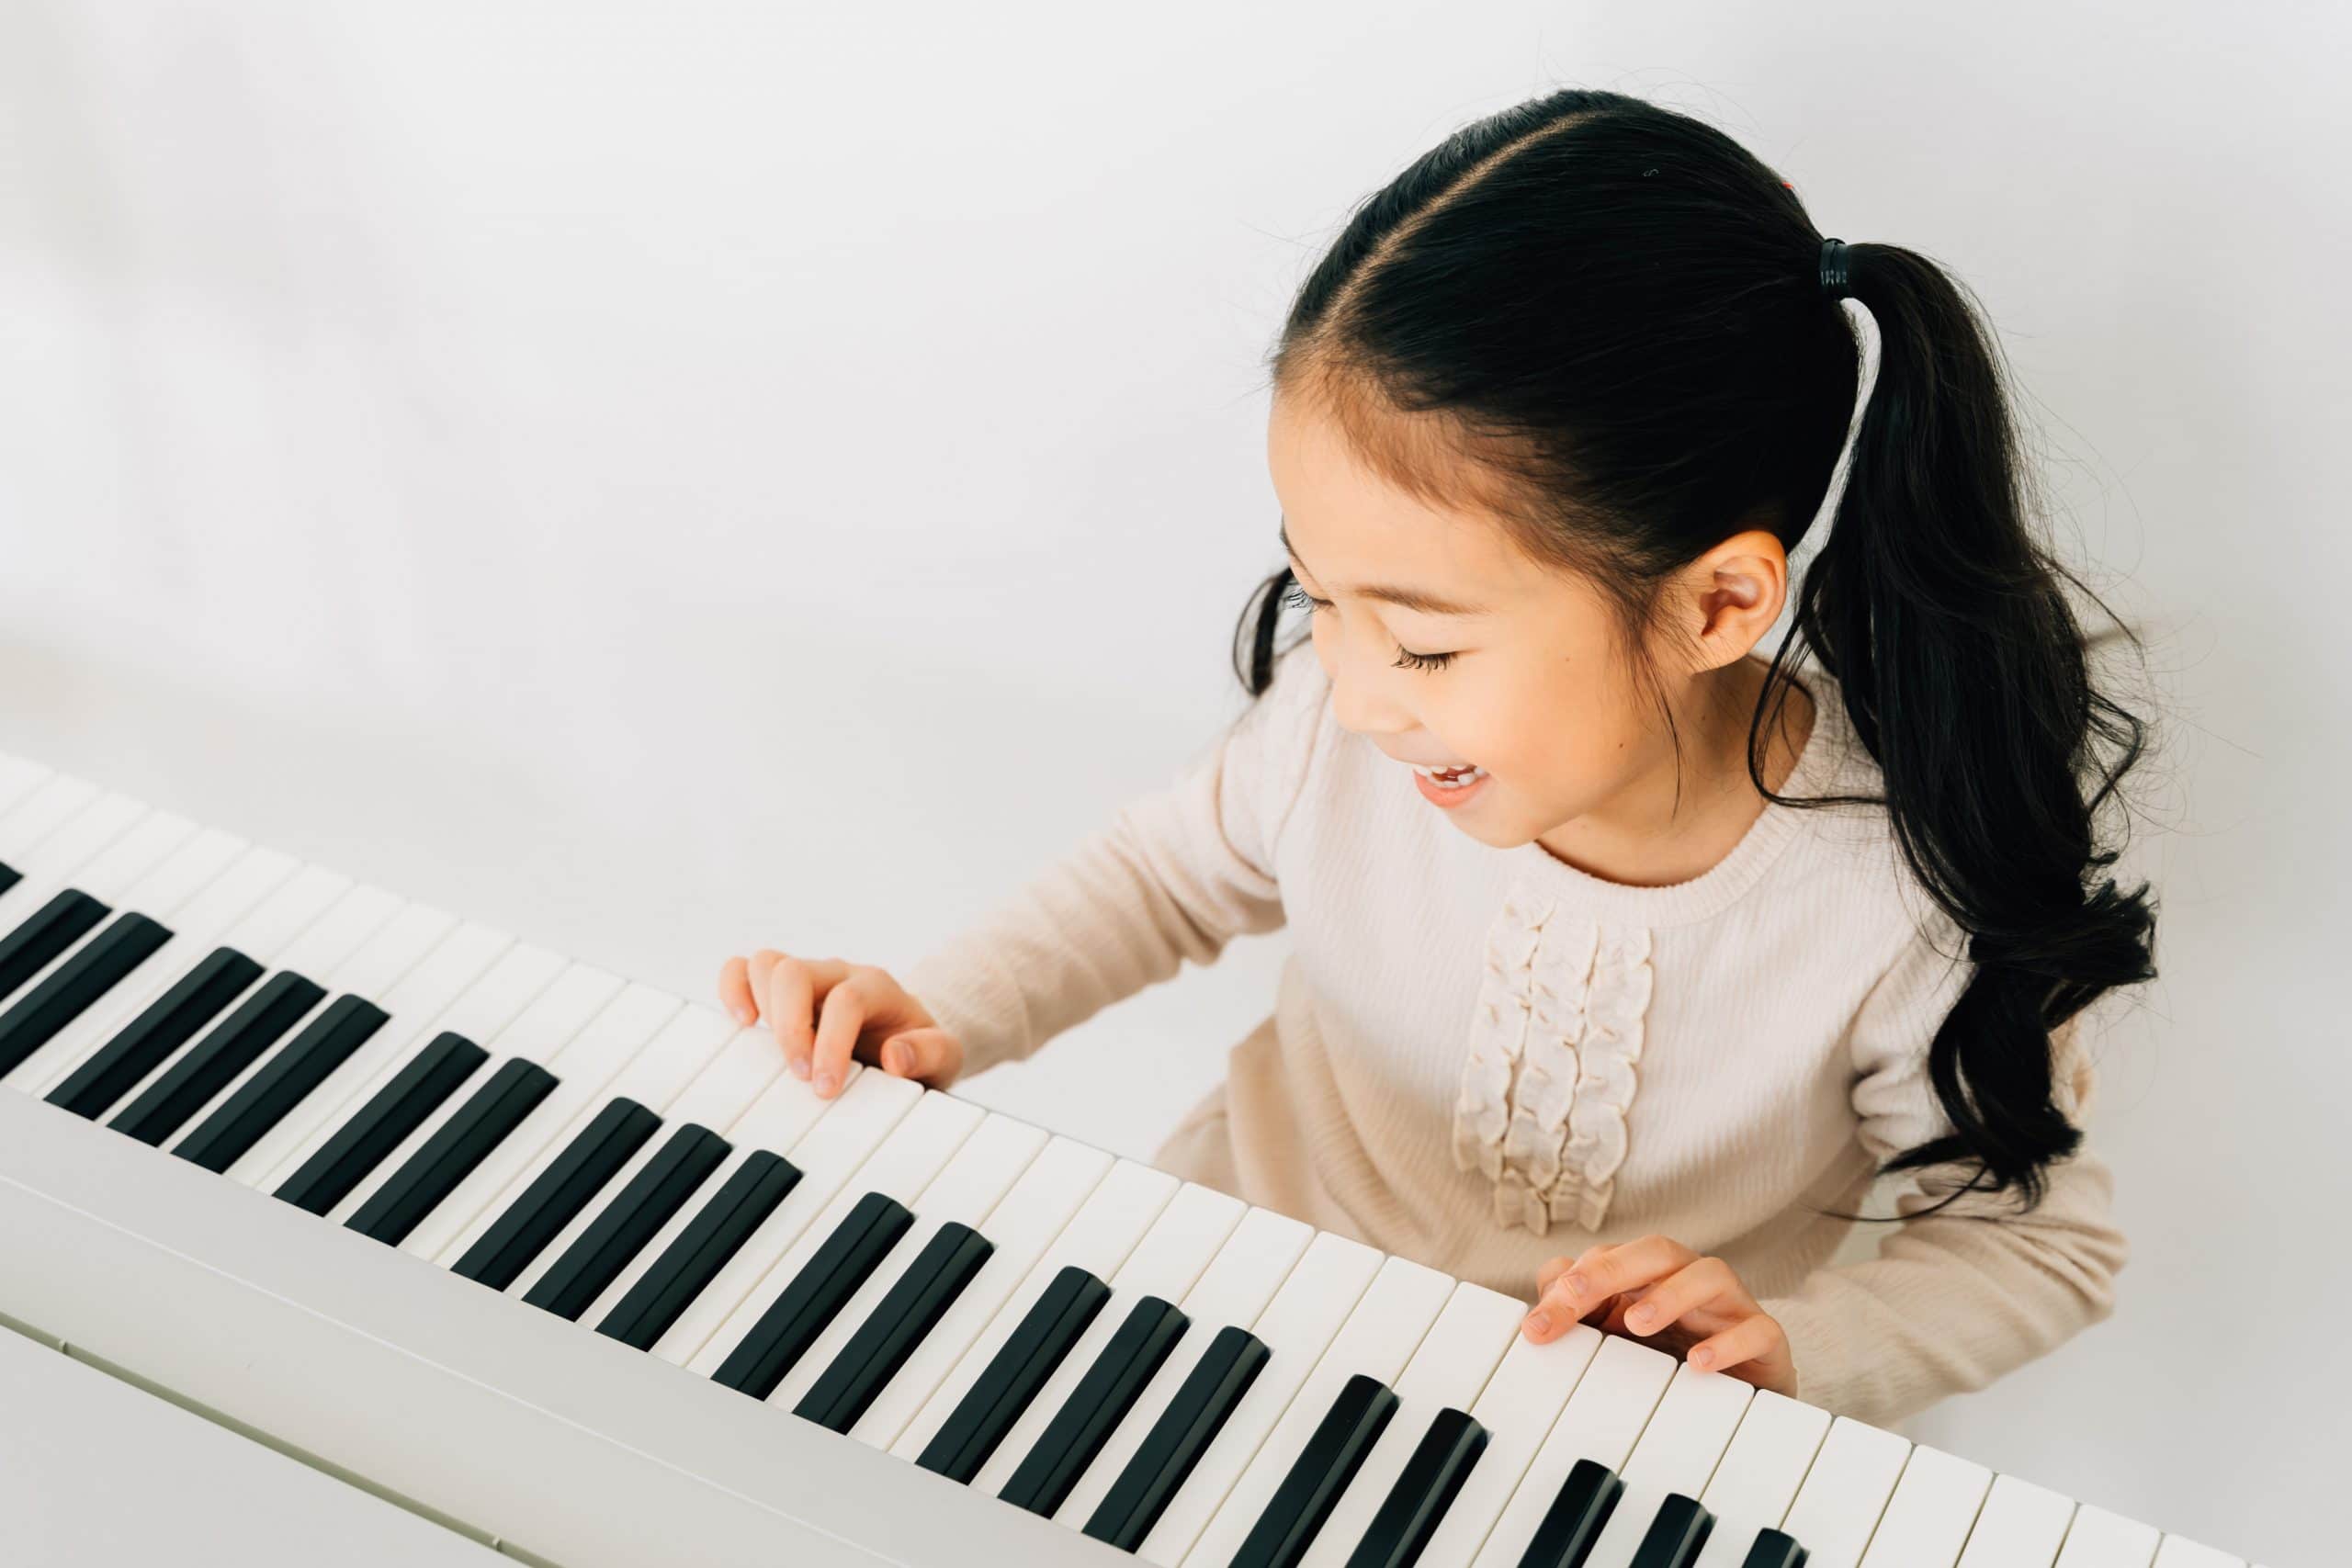 Free Online Music Classes for Kids